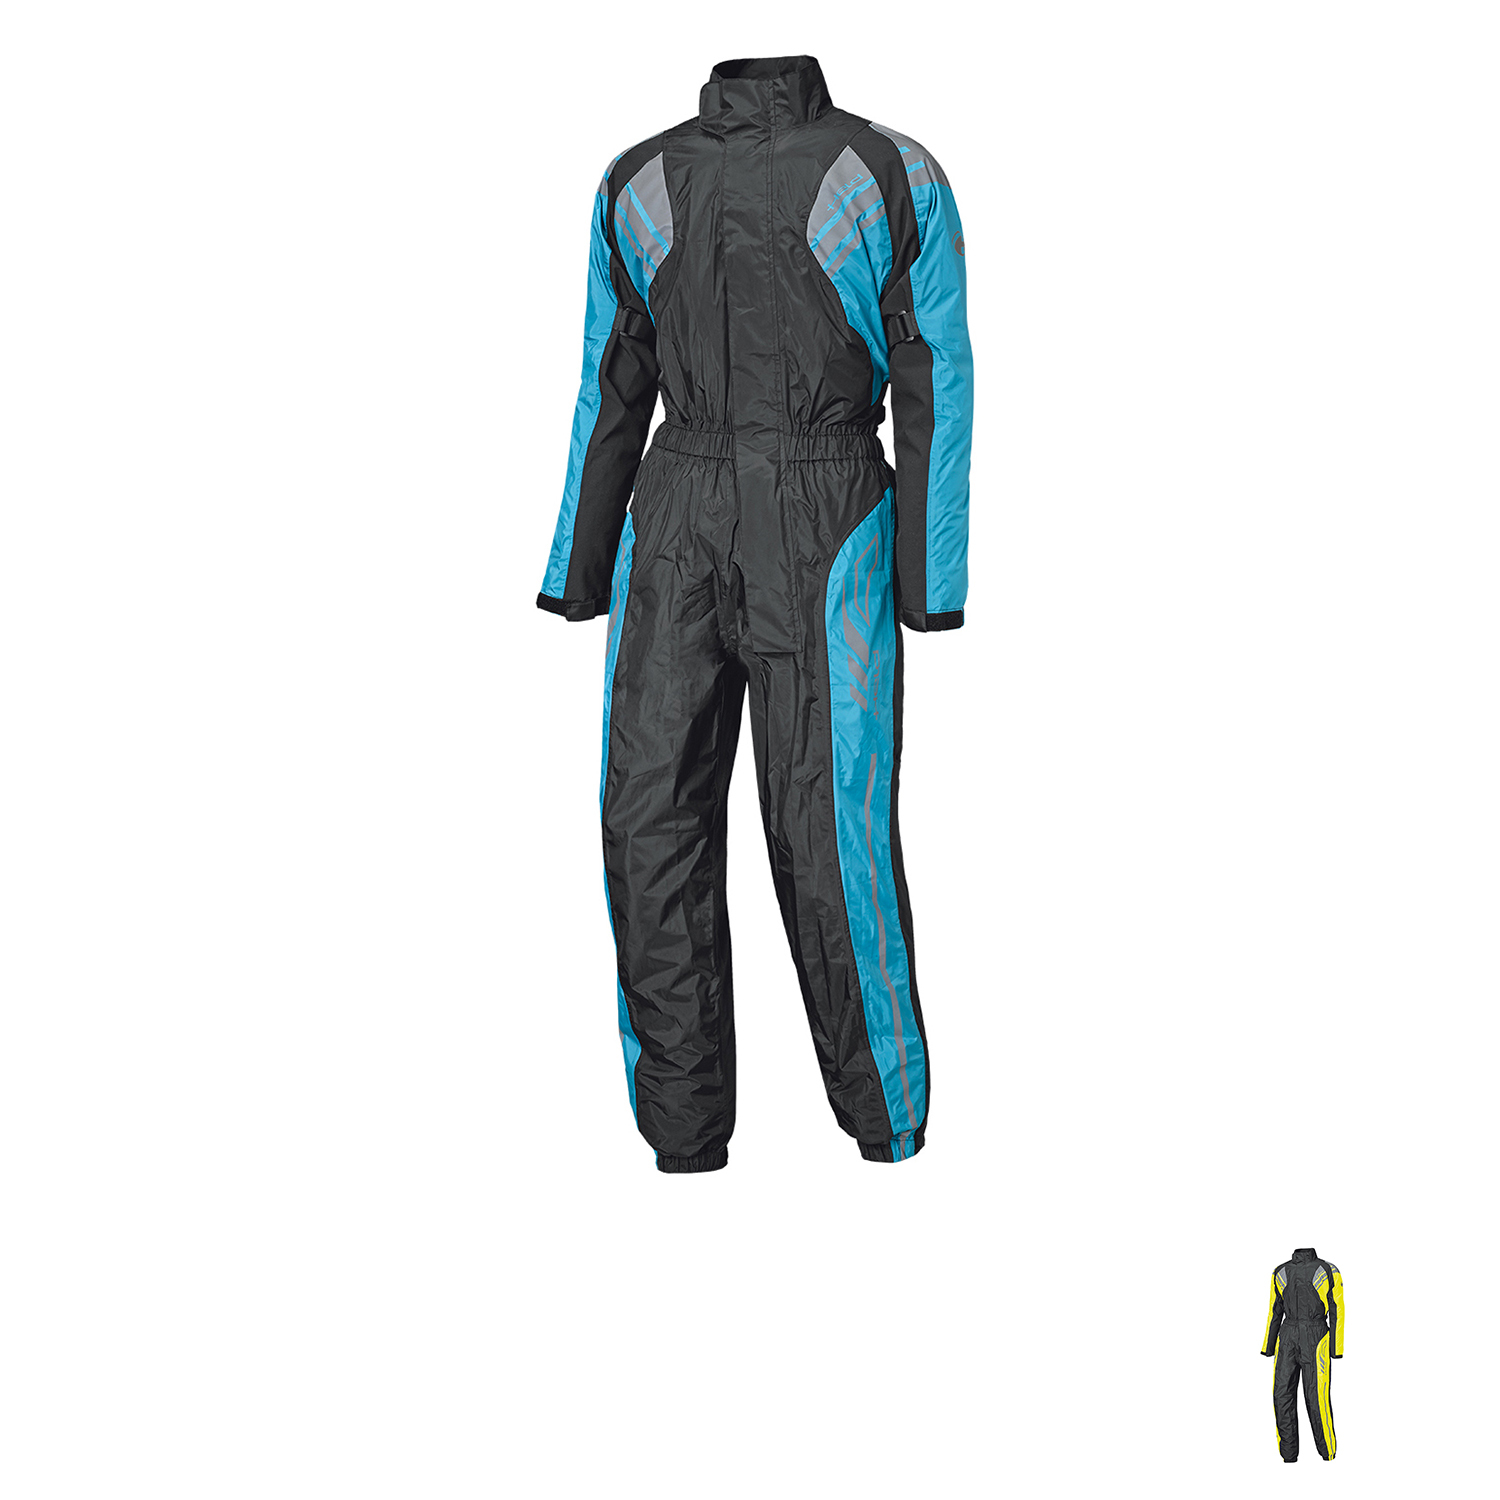 Held Flood Rain Suit - Available in Various Sizes